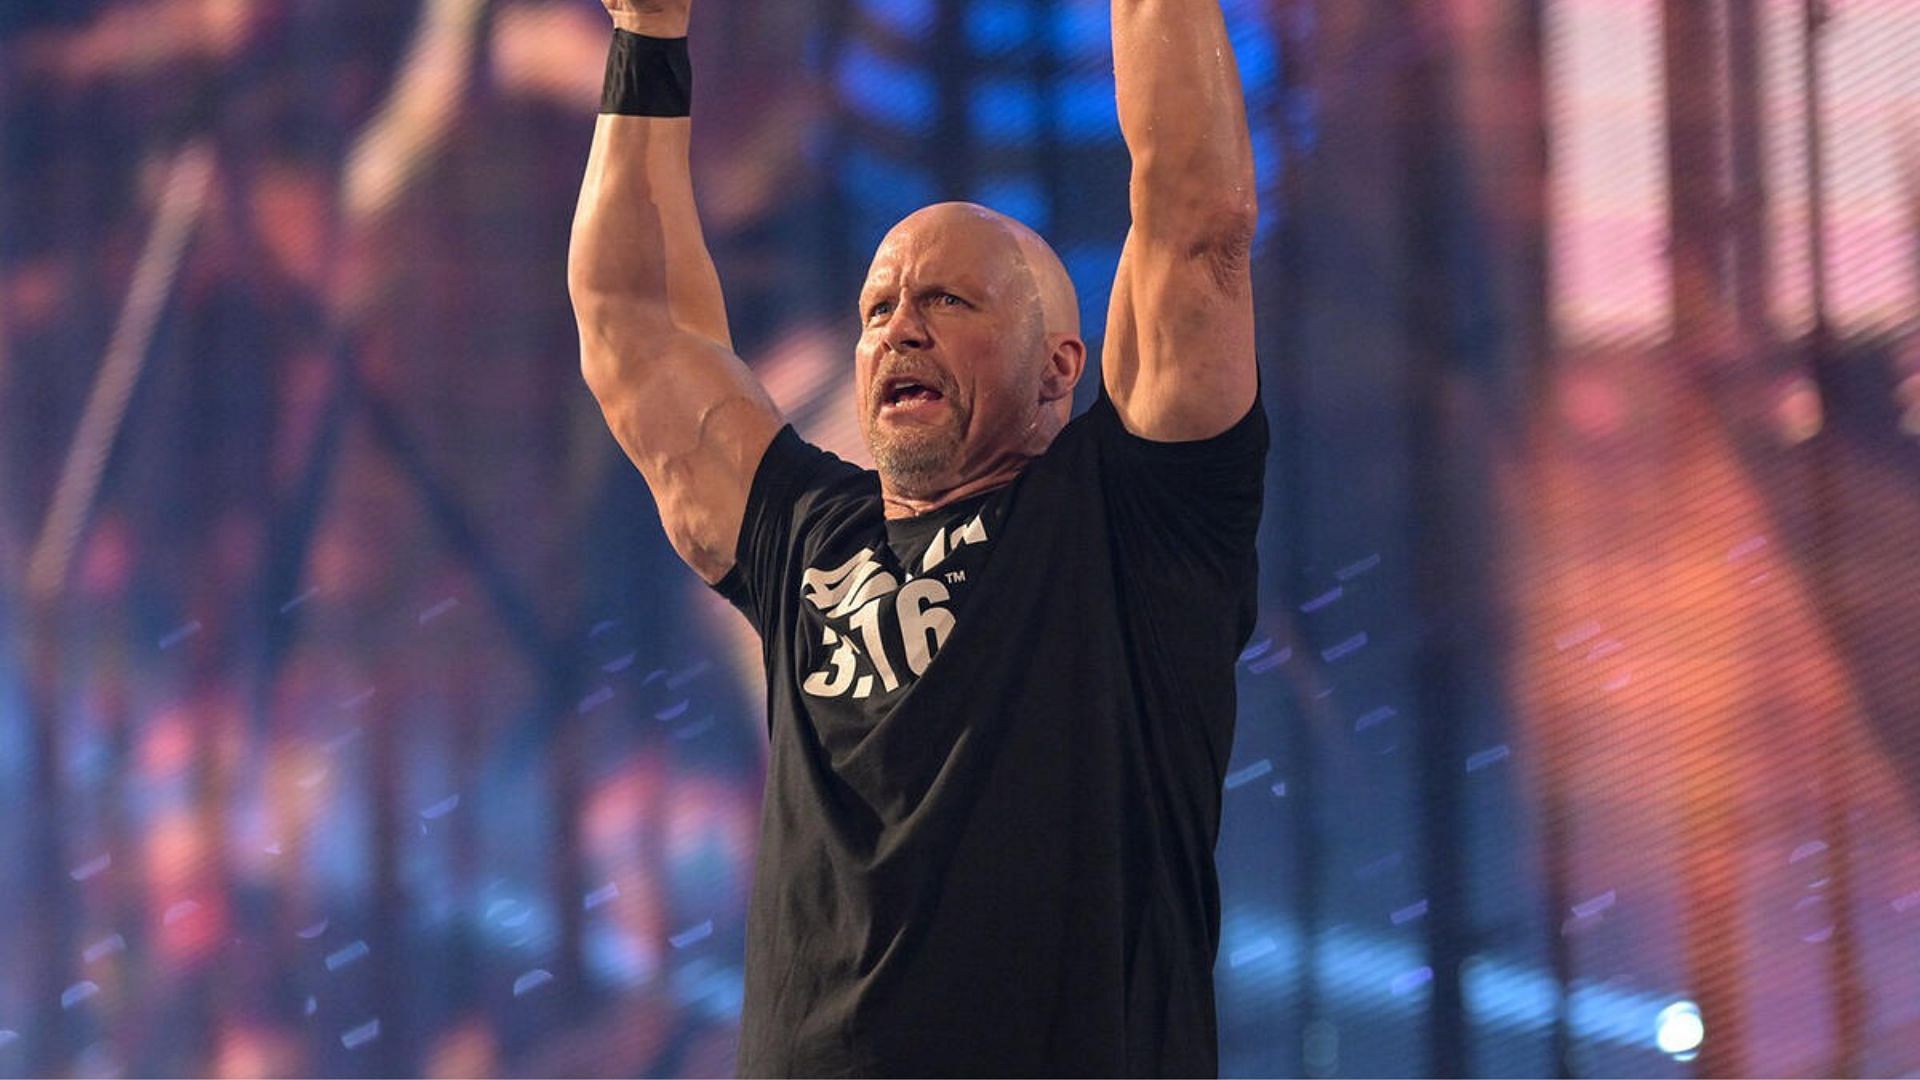 Steve Austin during his match at WrestleMania 38